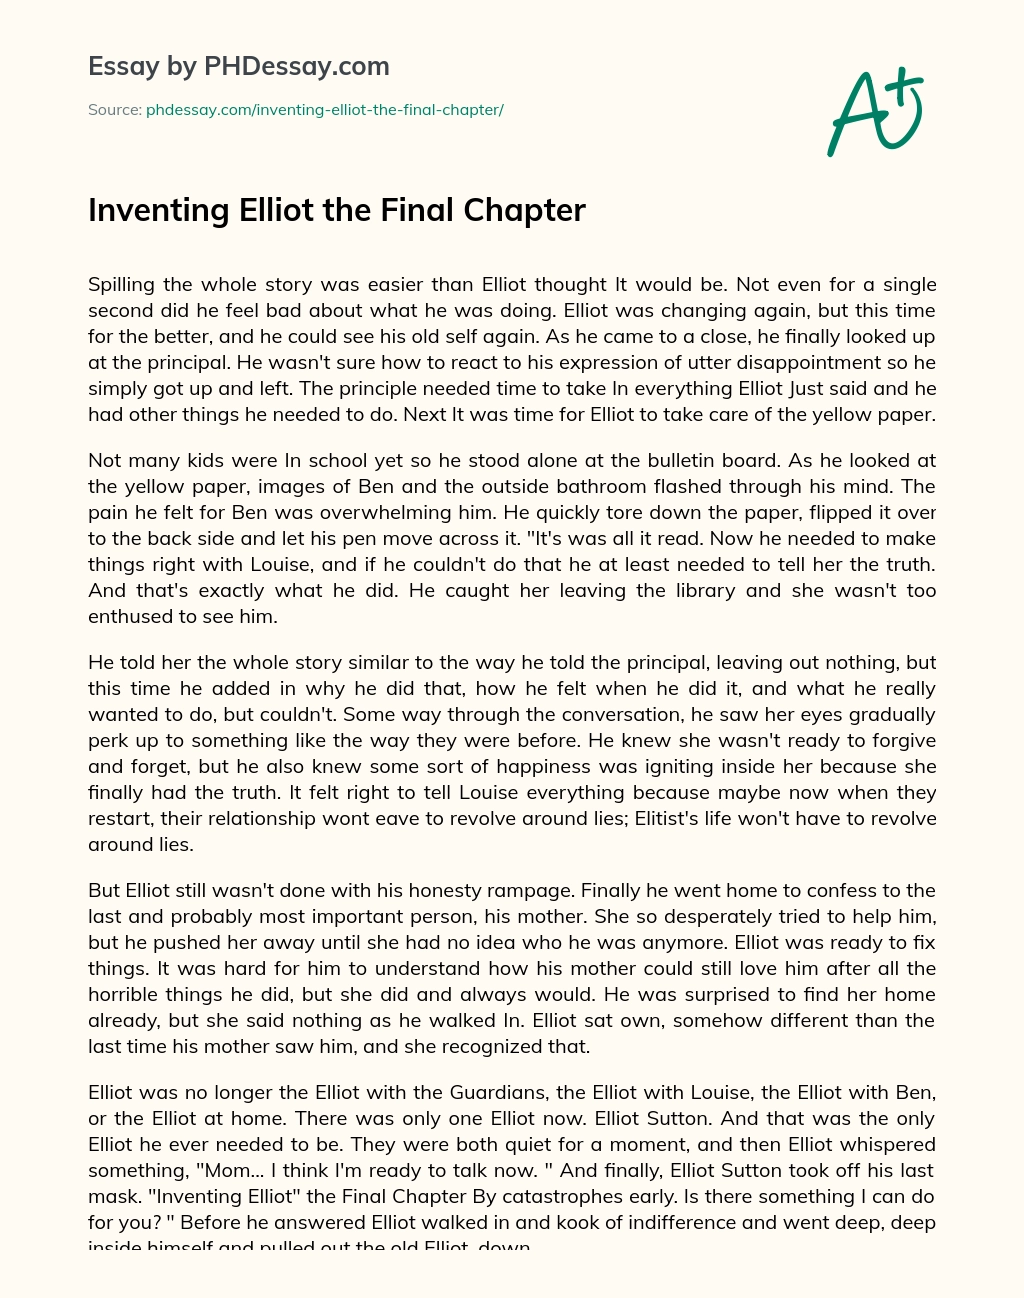 Inventing Elliot the Final Chapter essay